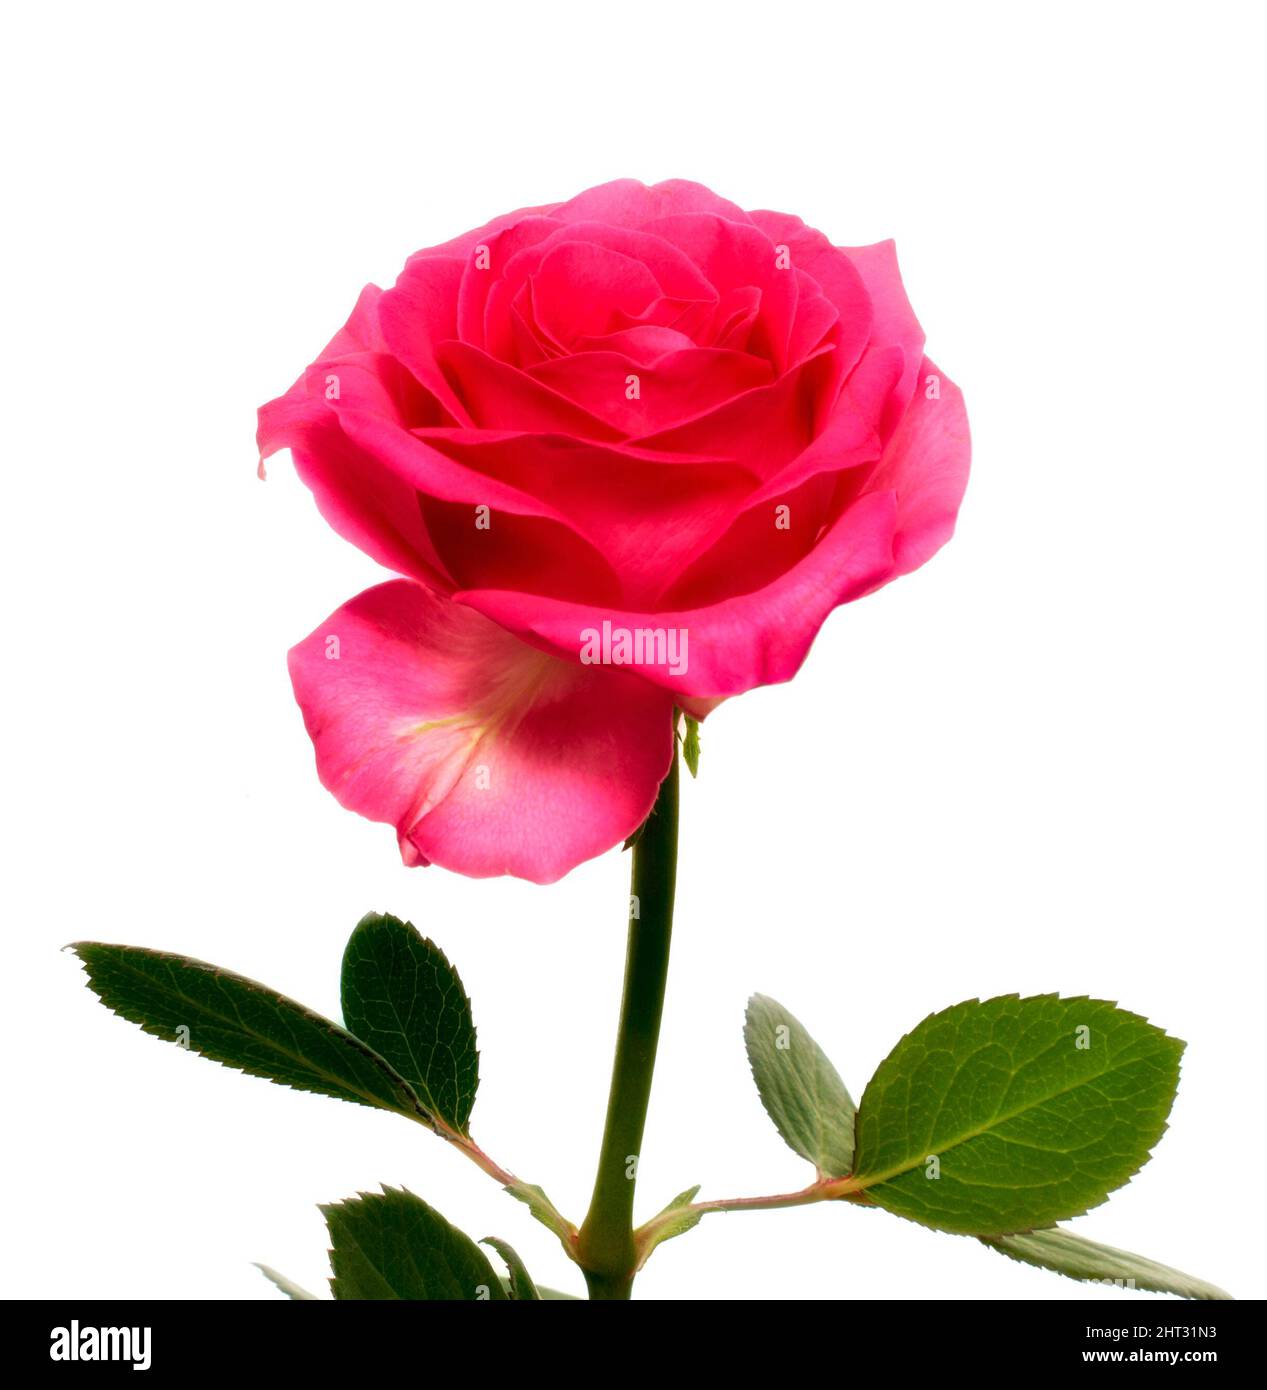 The rose. A photo of a beautiful rose. Stock Photo